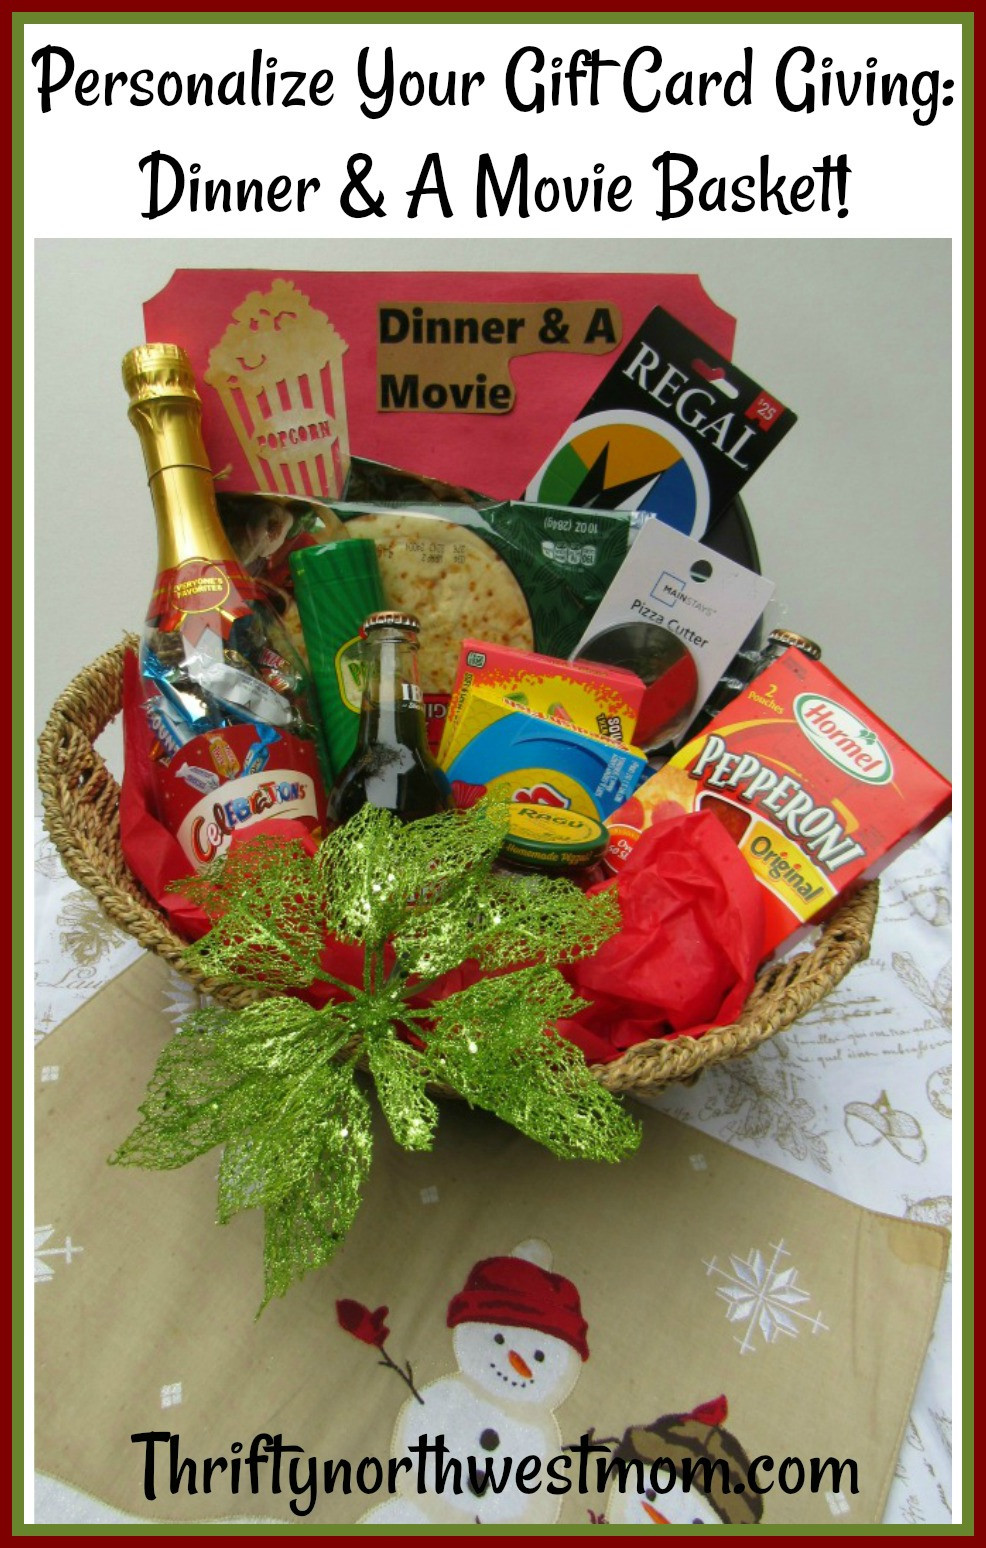 Creative Gift Card Basket Ideas
 Dinner & A Movie Gift Basket Idea How to Personalize